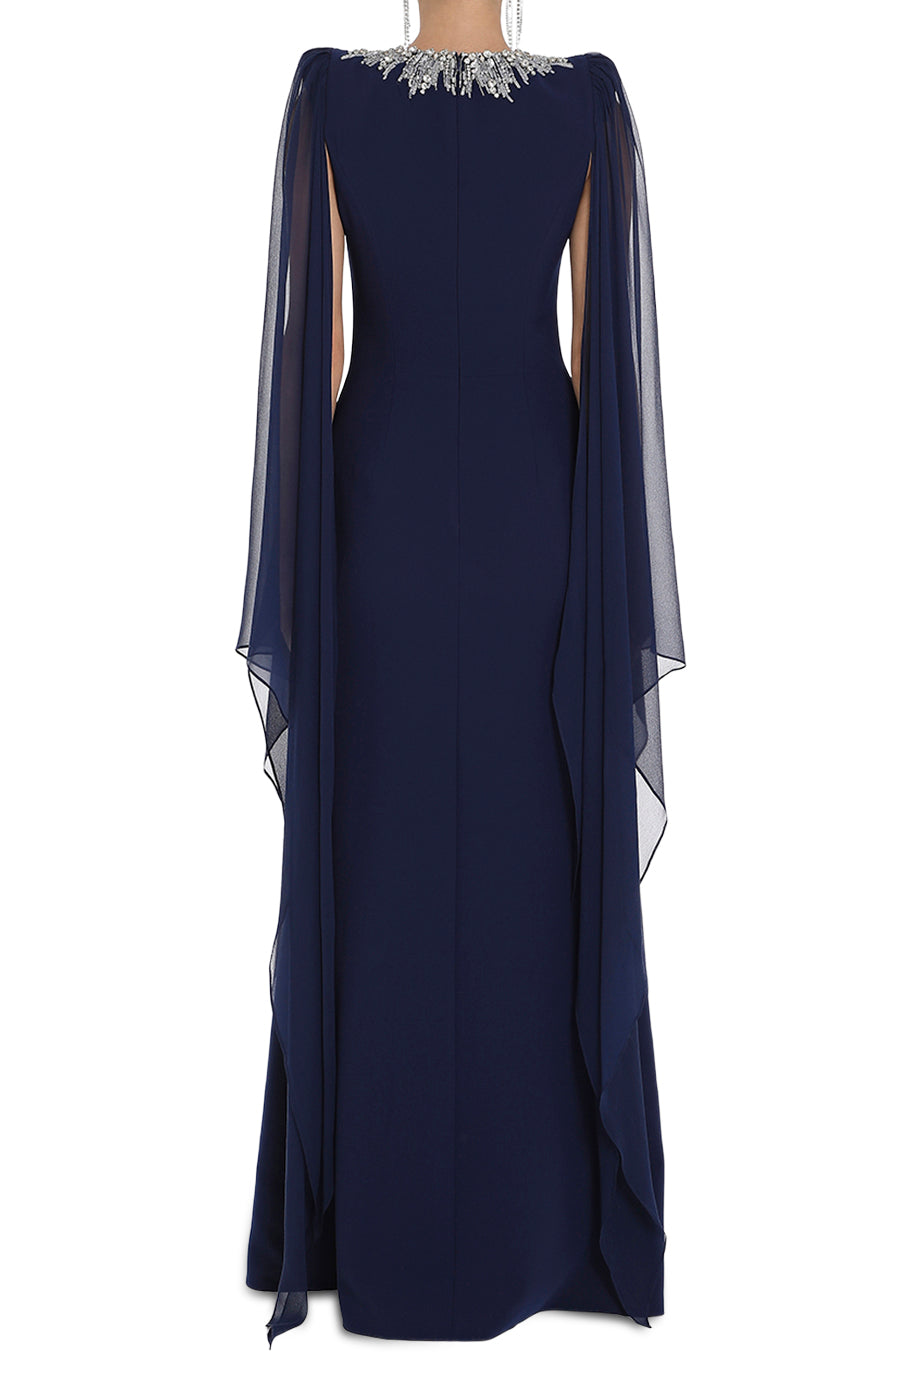 Jenny Packham Flame Lily A-Line Gown in Navy. Shop from Etoile La Boutique